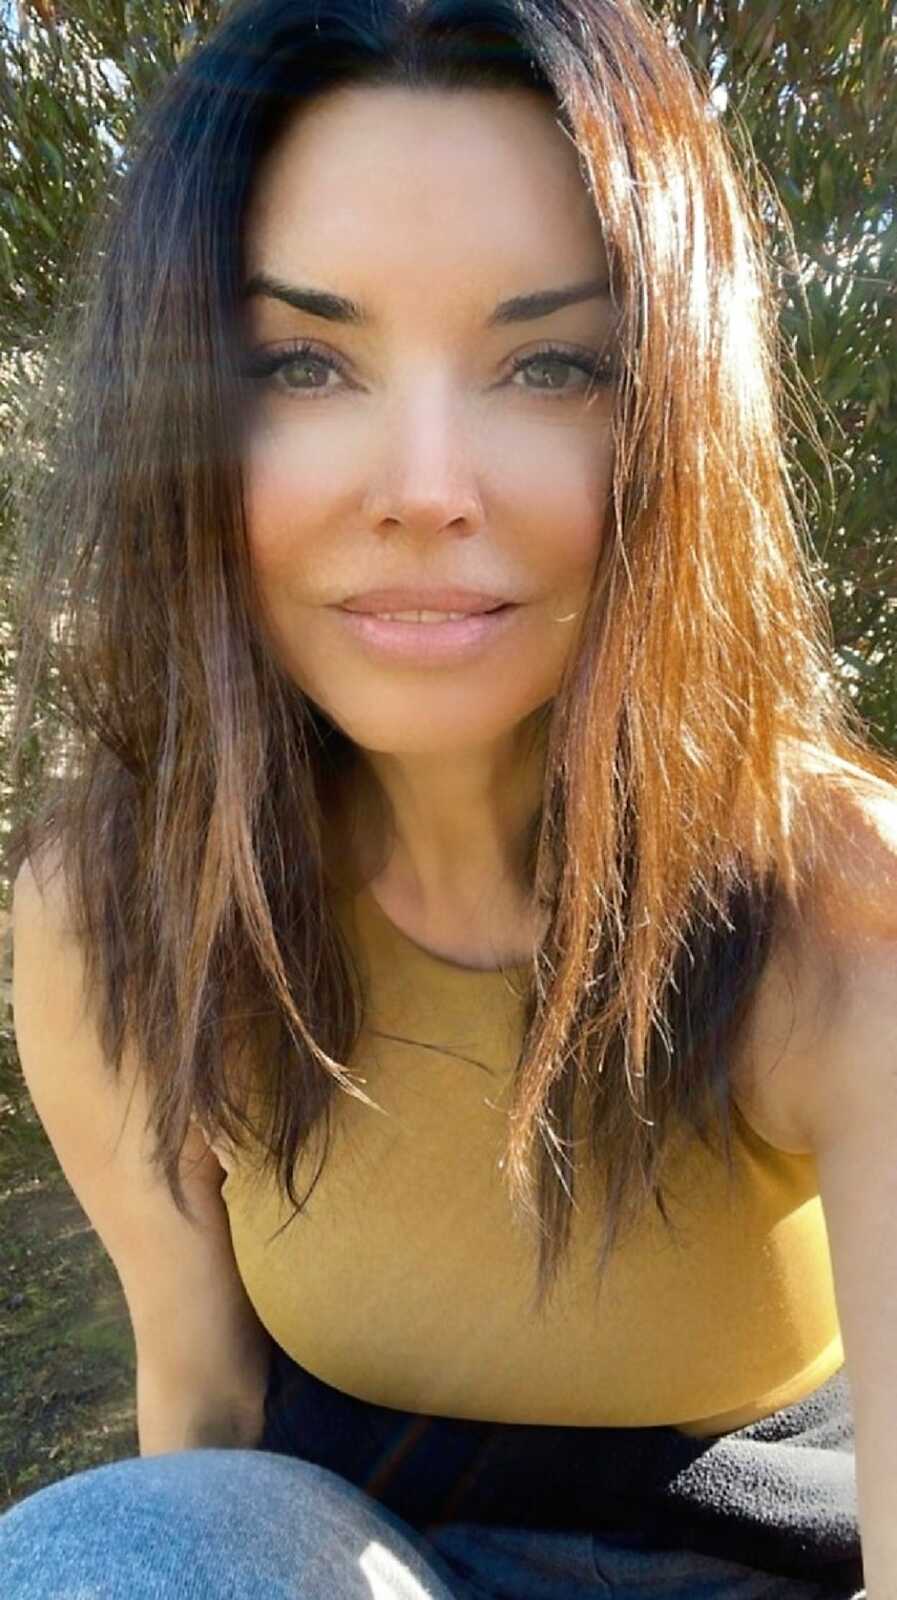 Empowerment coach for adult adoptees taking a selfie with the sunlight of the left side of her face and wearing a mustard yellow top